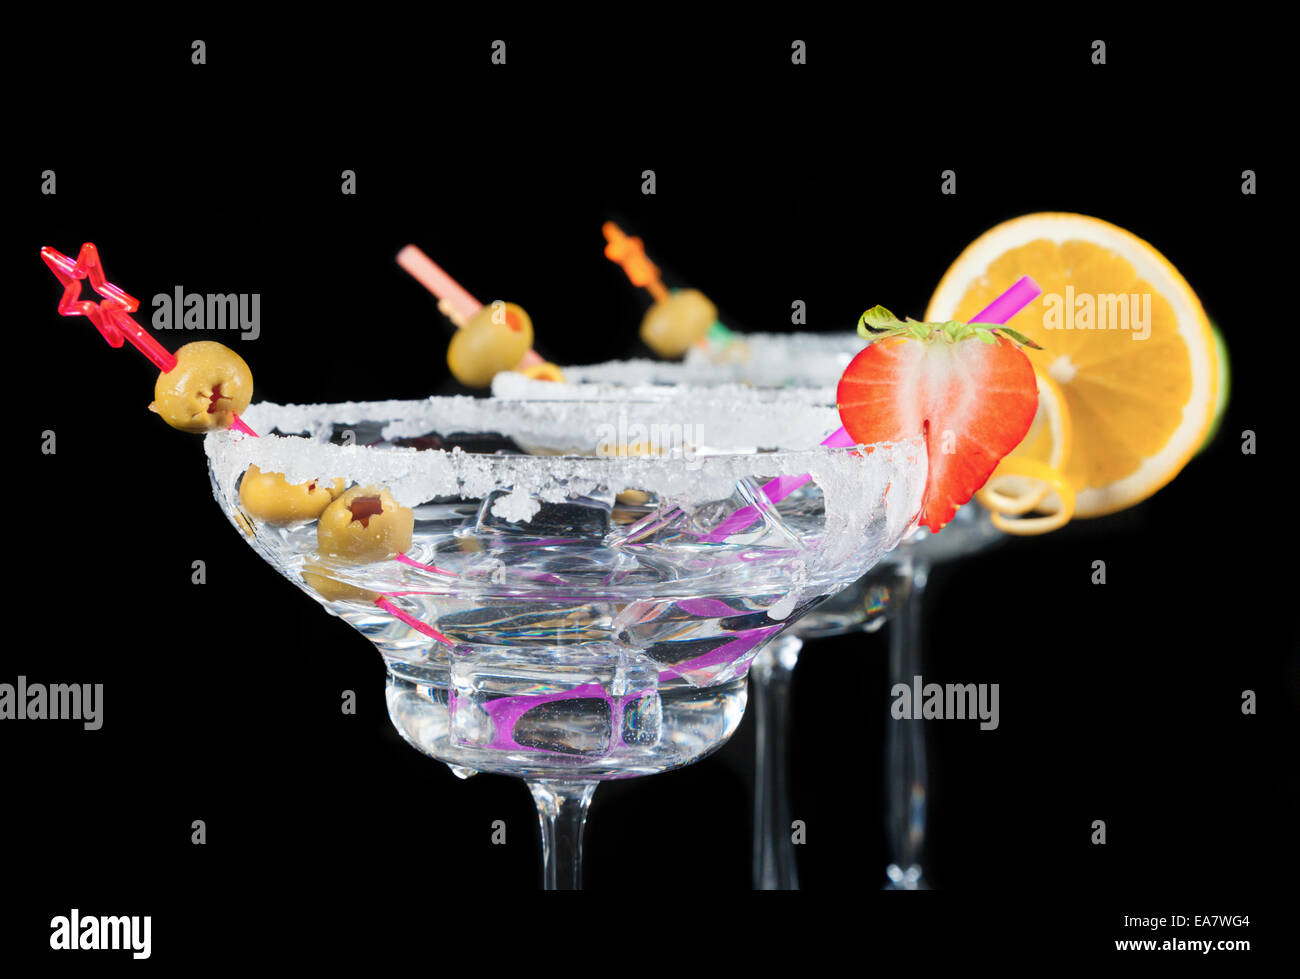 Glasses of alcohol cocktails isolated on black background Stock Photo